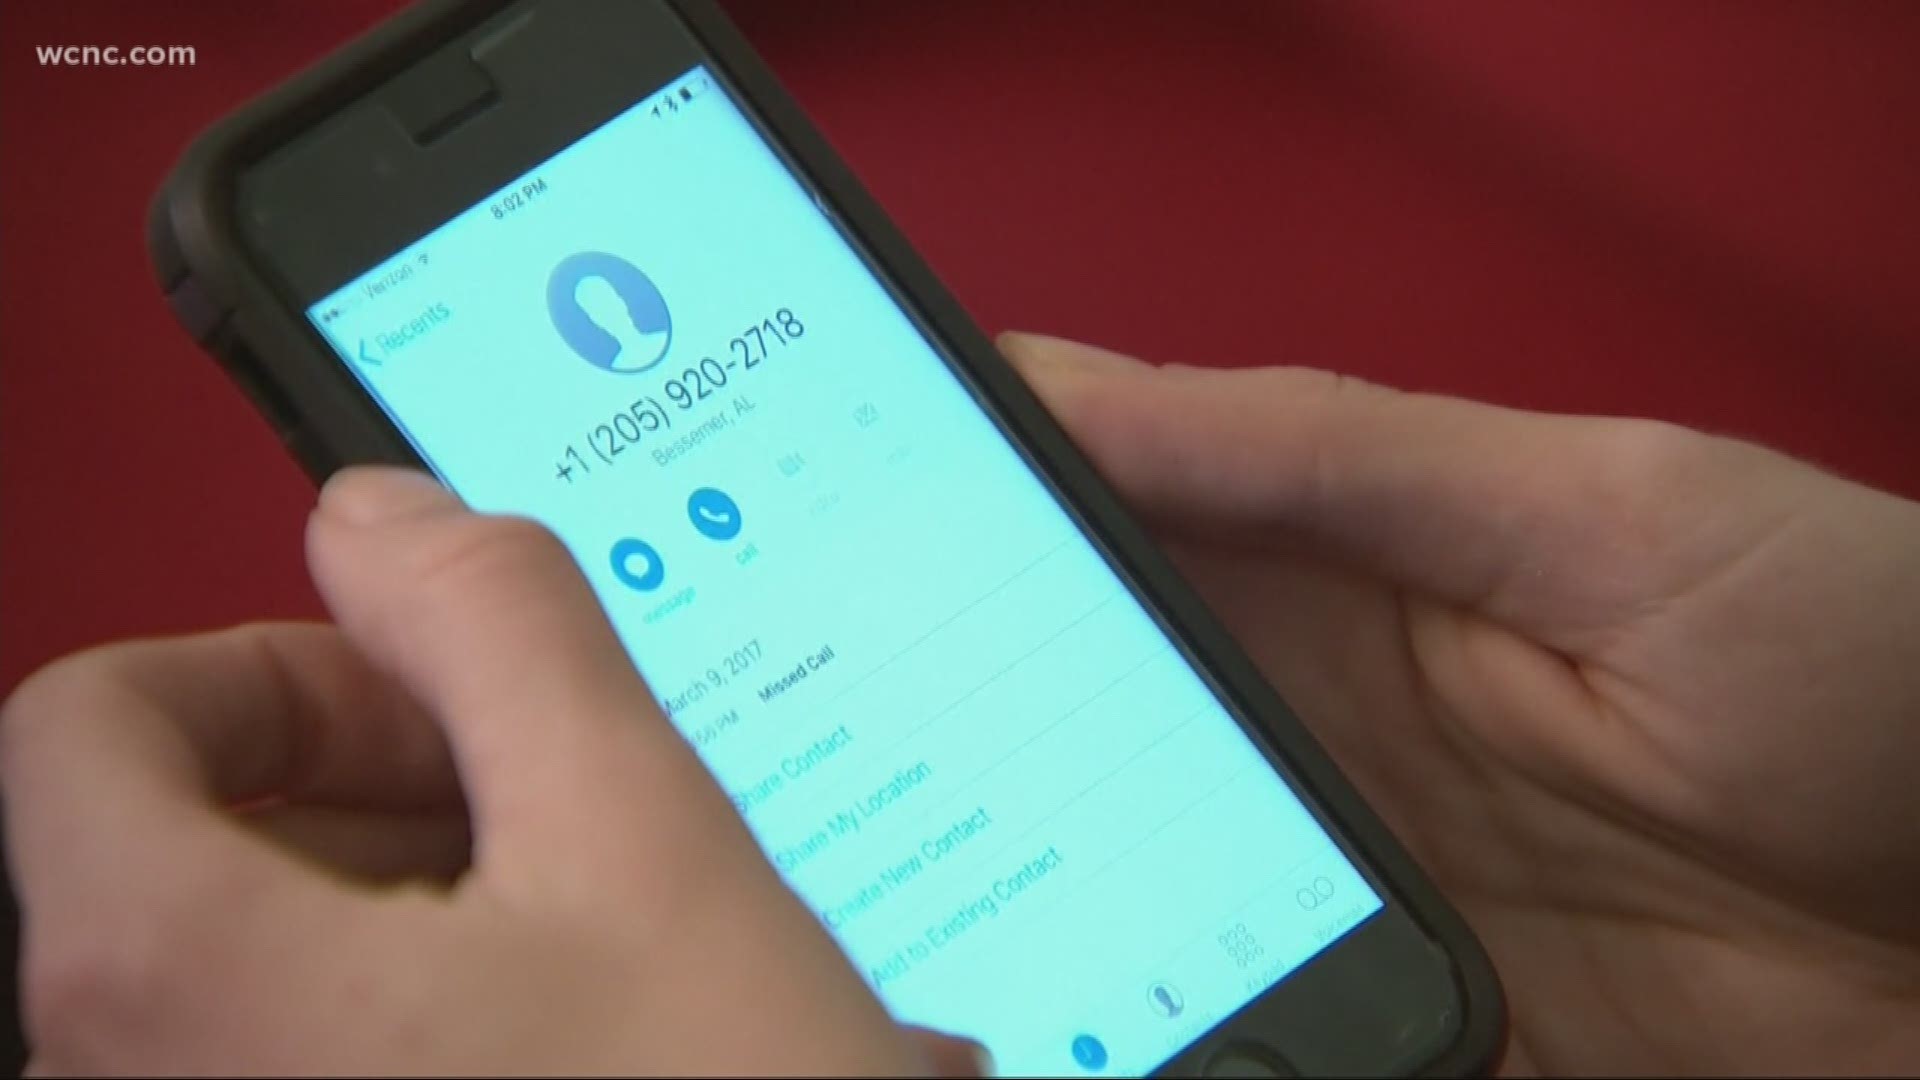 North Carolina Attorney General Josh Stein is urging people to sign a petition showing their frustration with robocalls in an attempt to slow down the annoying calls across the state.